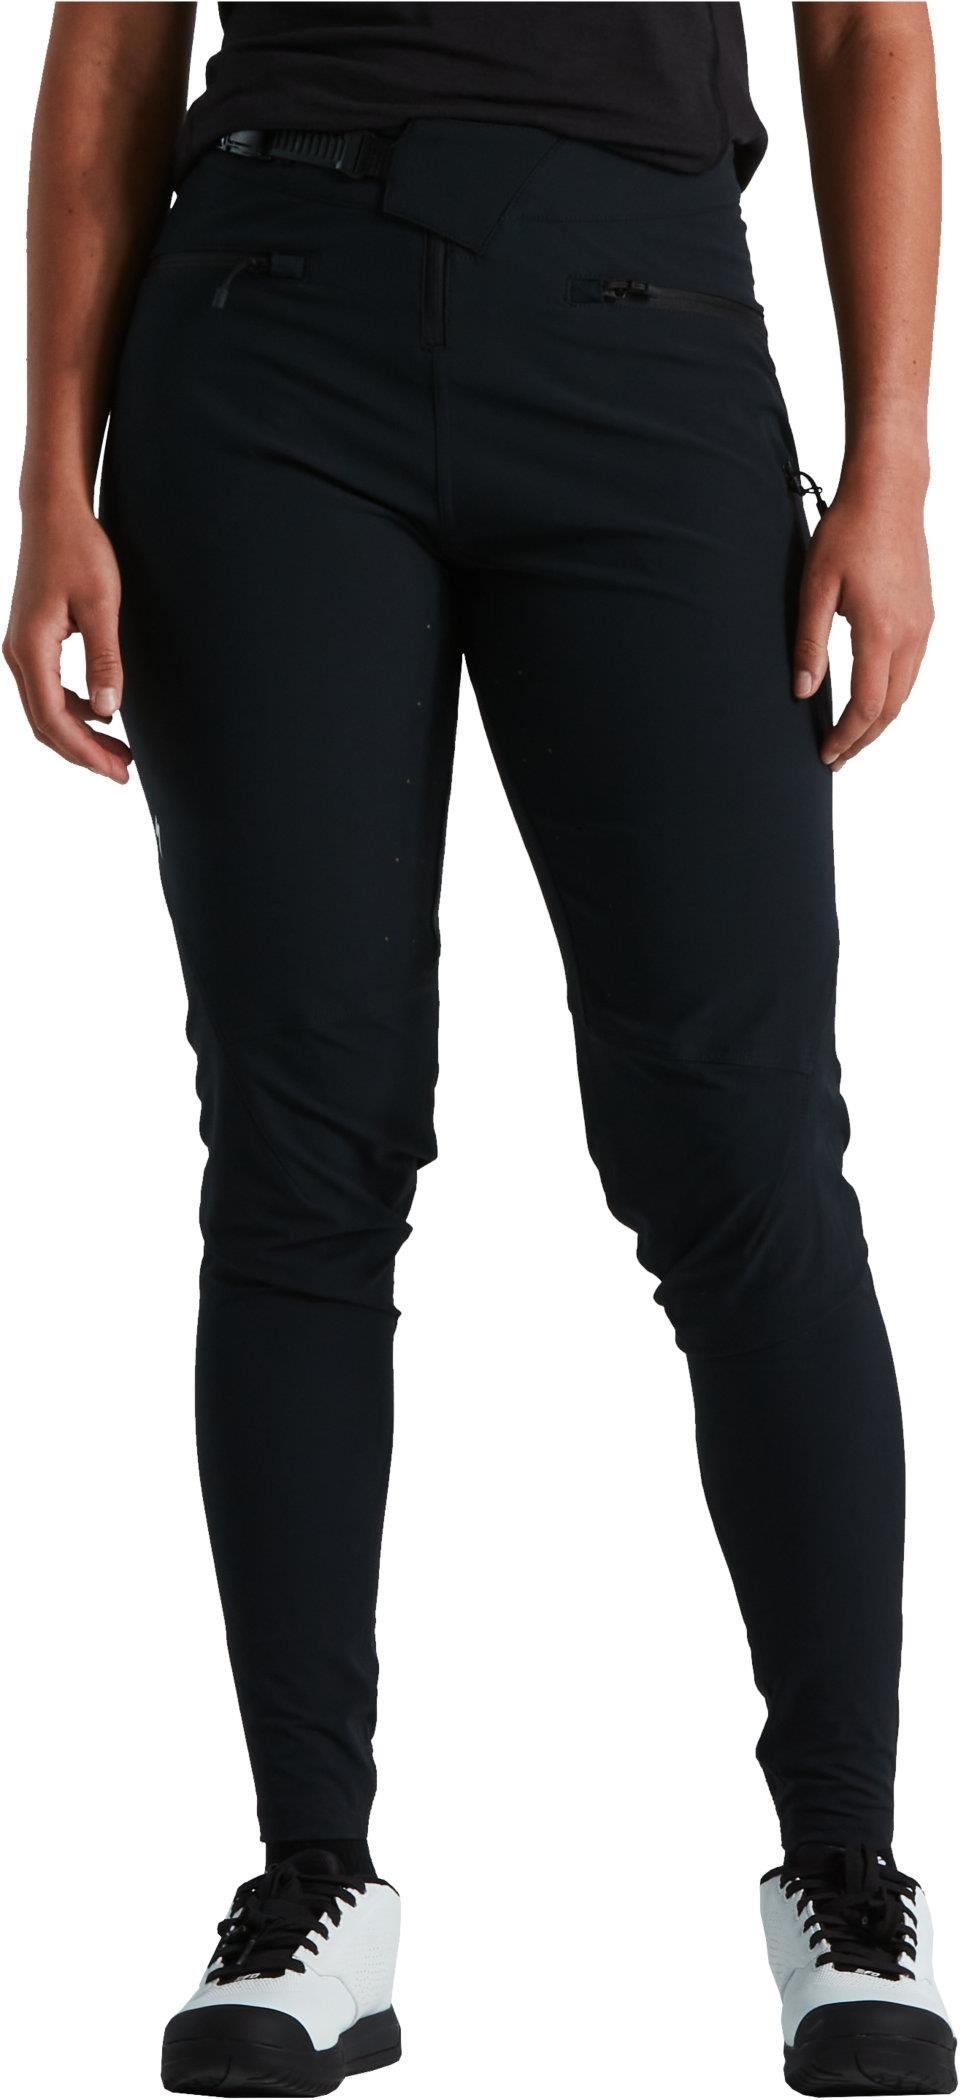 Trail Cycling Trousers image 0